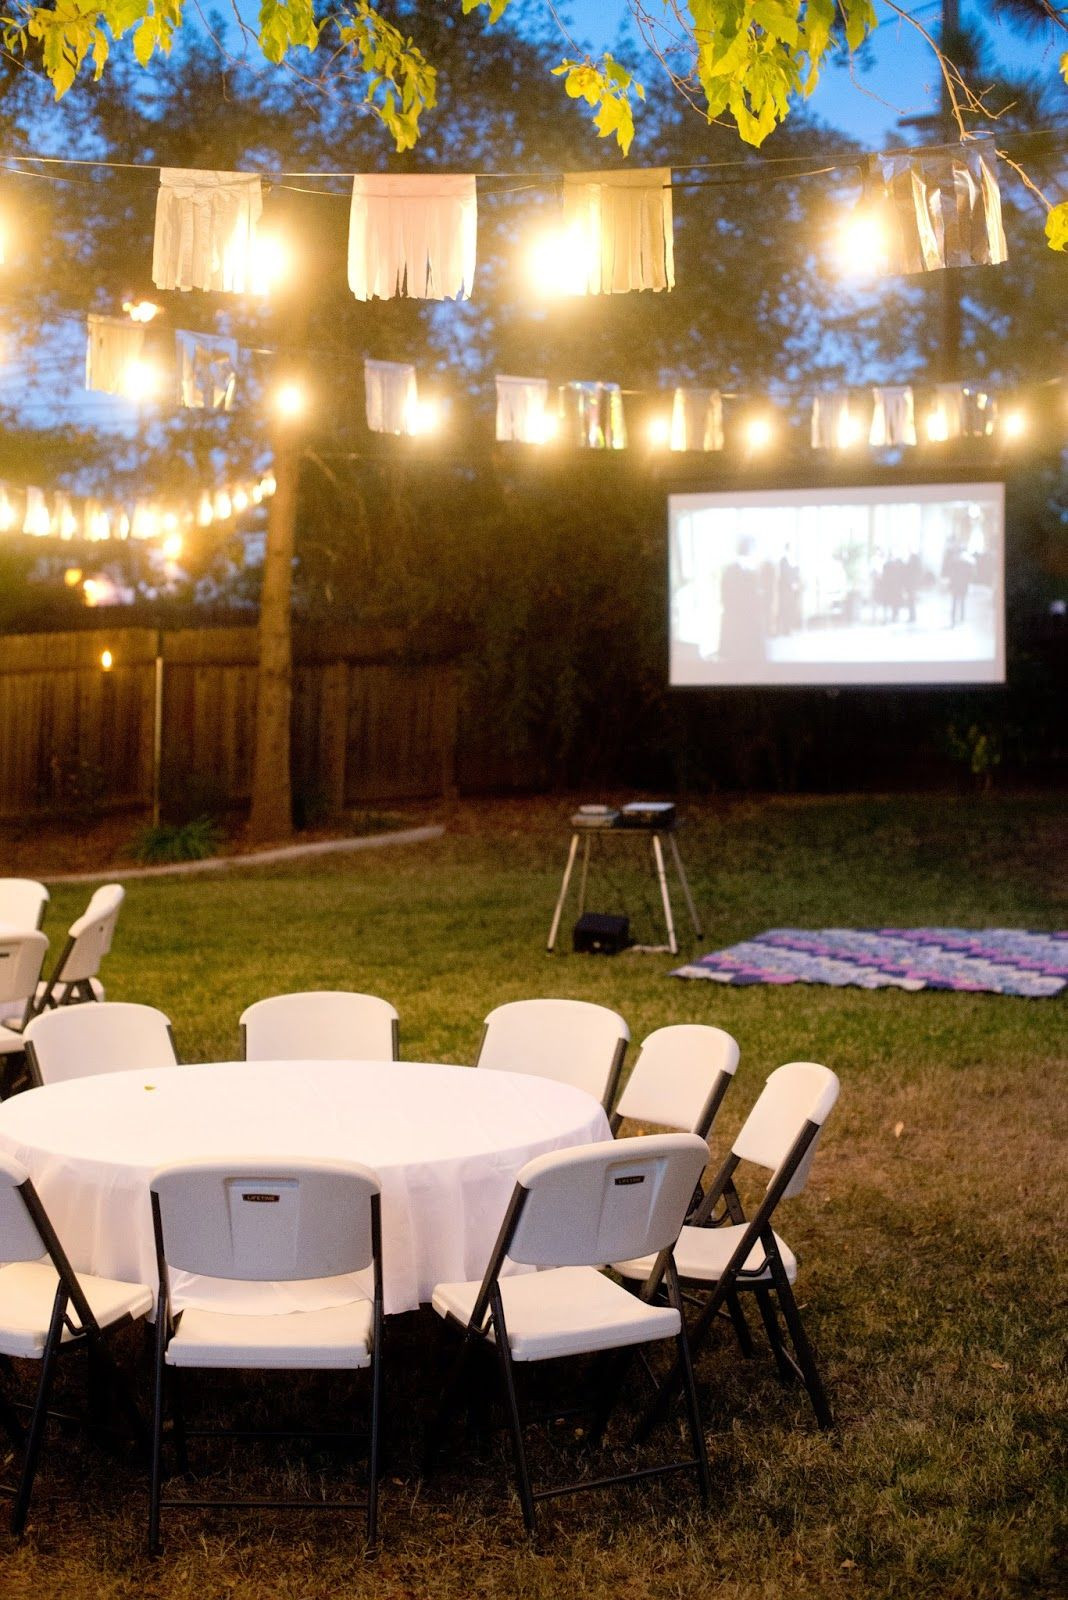 Backyard Party Design Ideas
 Fall Backyard Birthday Party and Movie Night in 2019